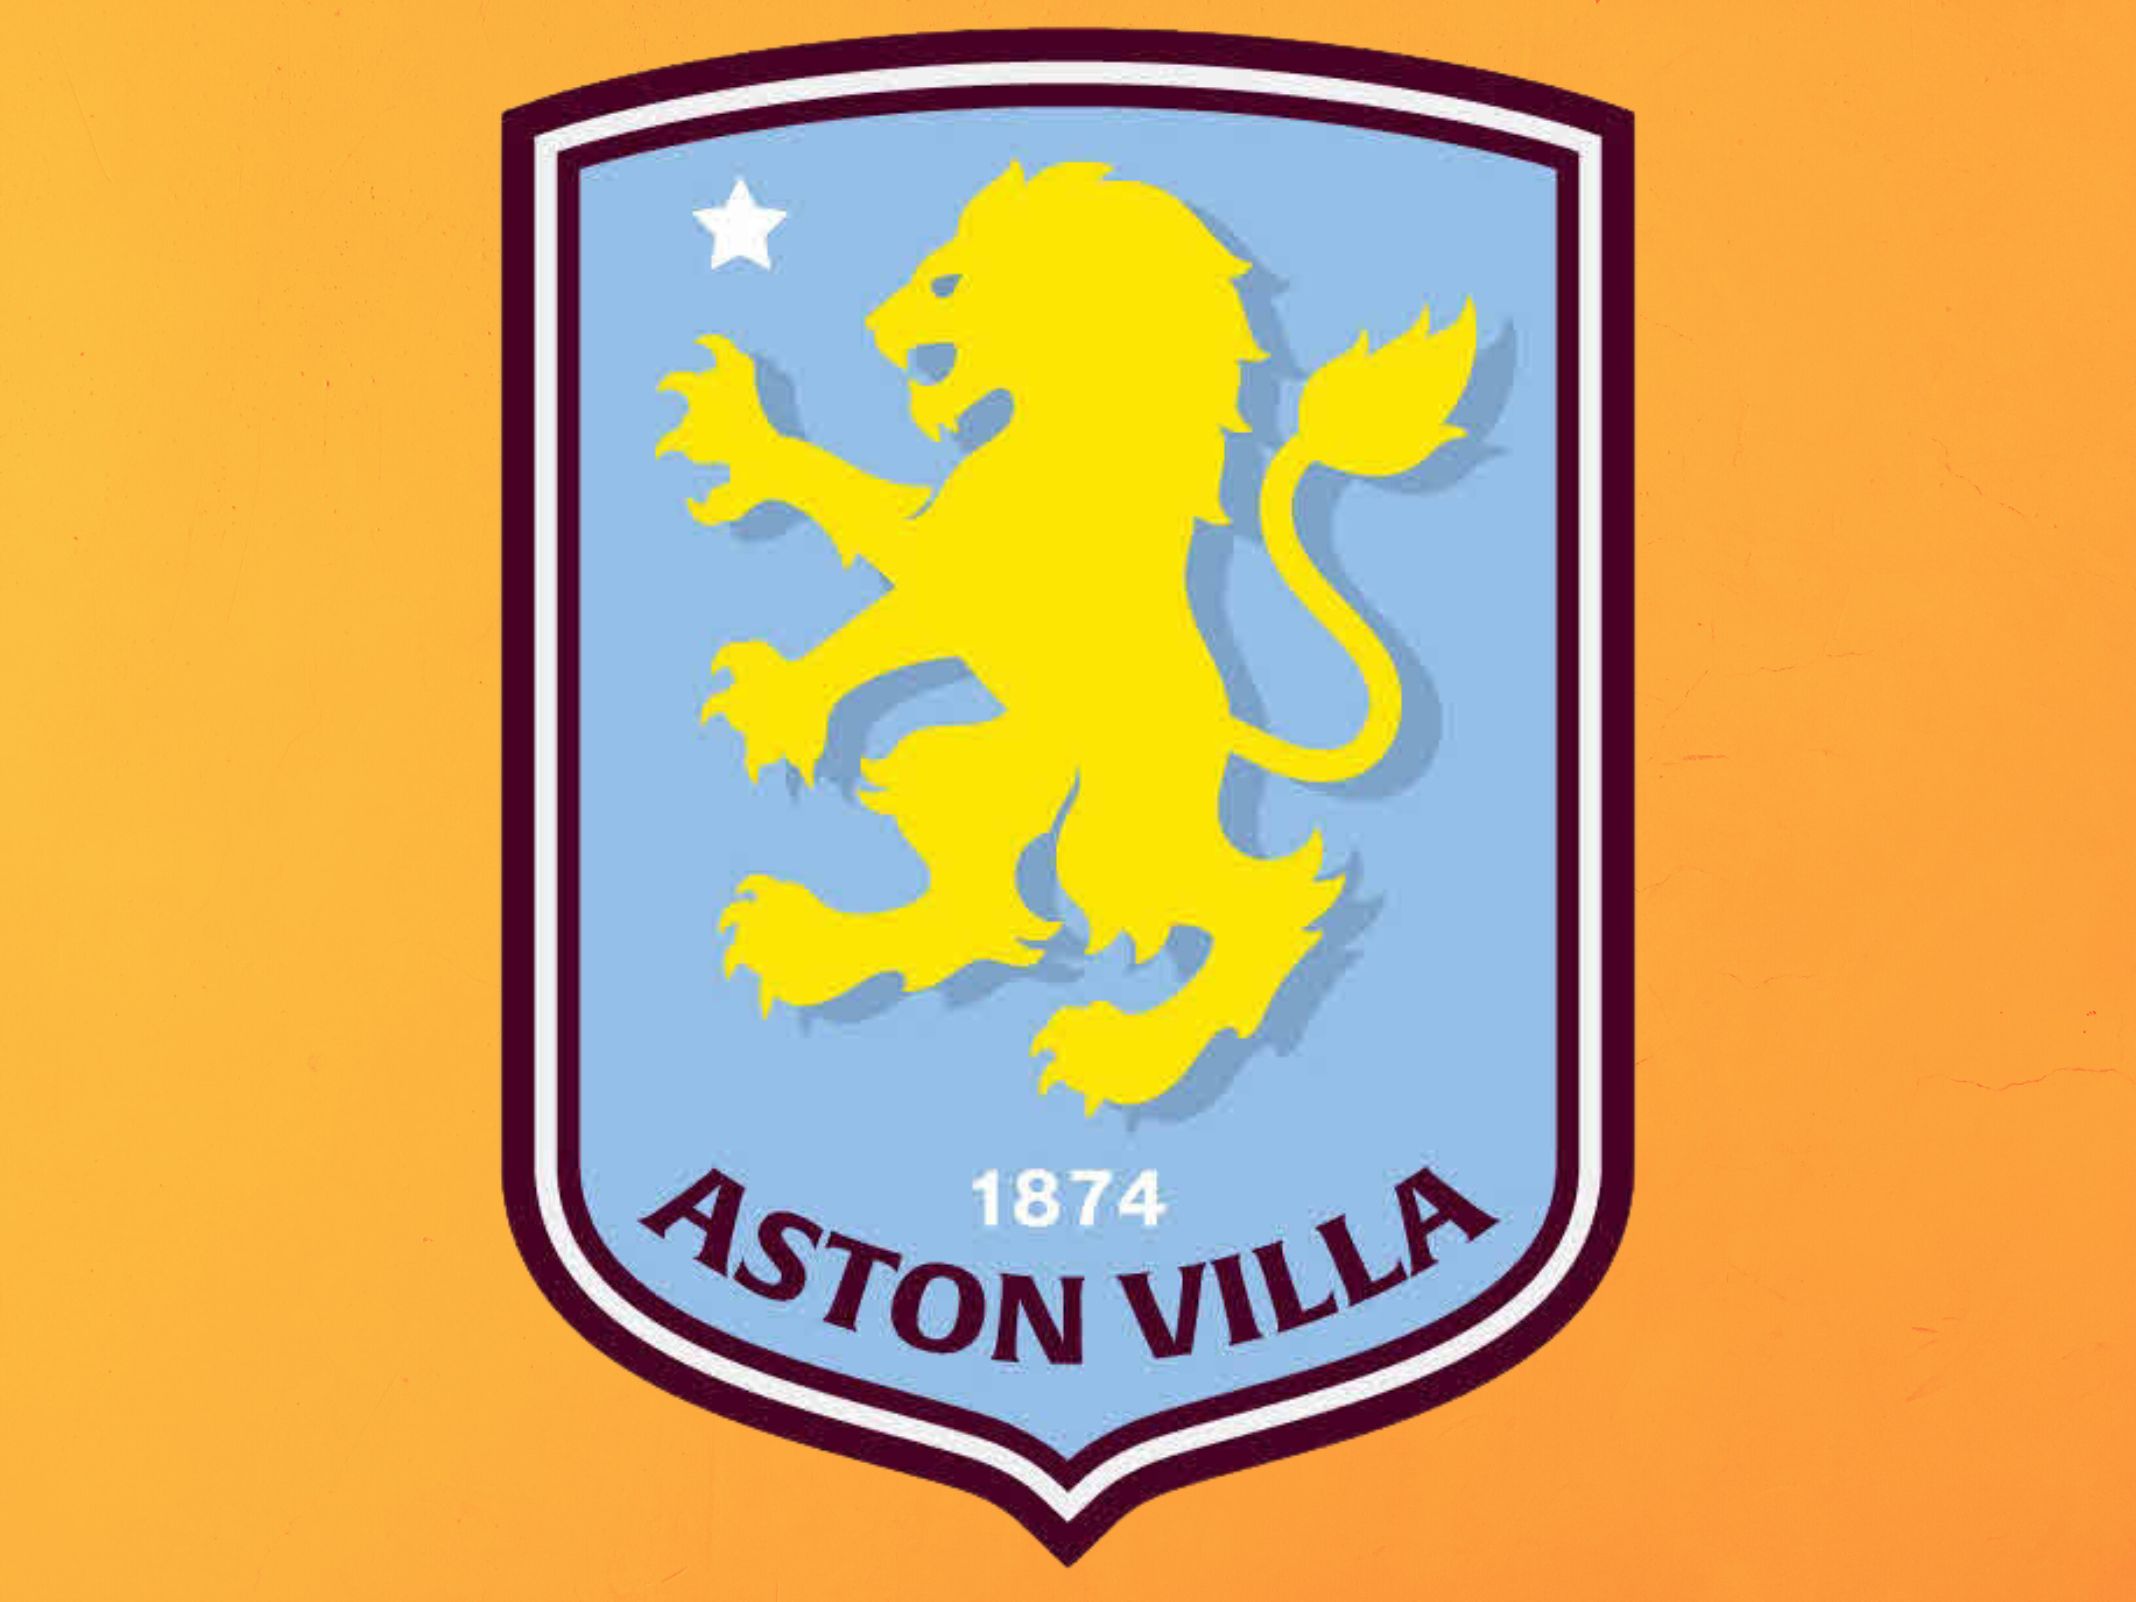 Are Aston VIlla Getting a Badge Redesign again? Here’s What We Know